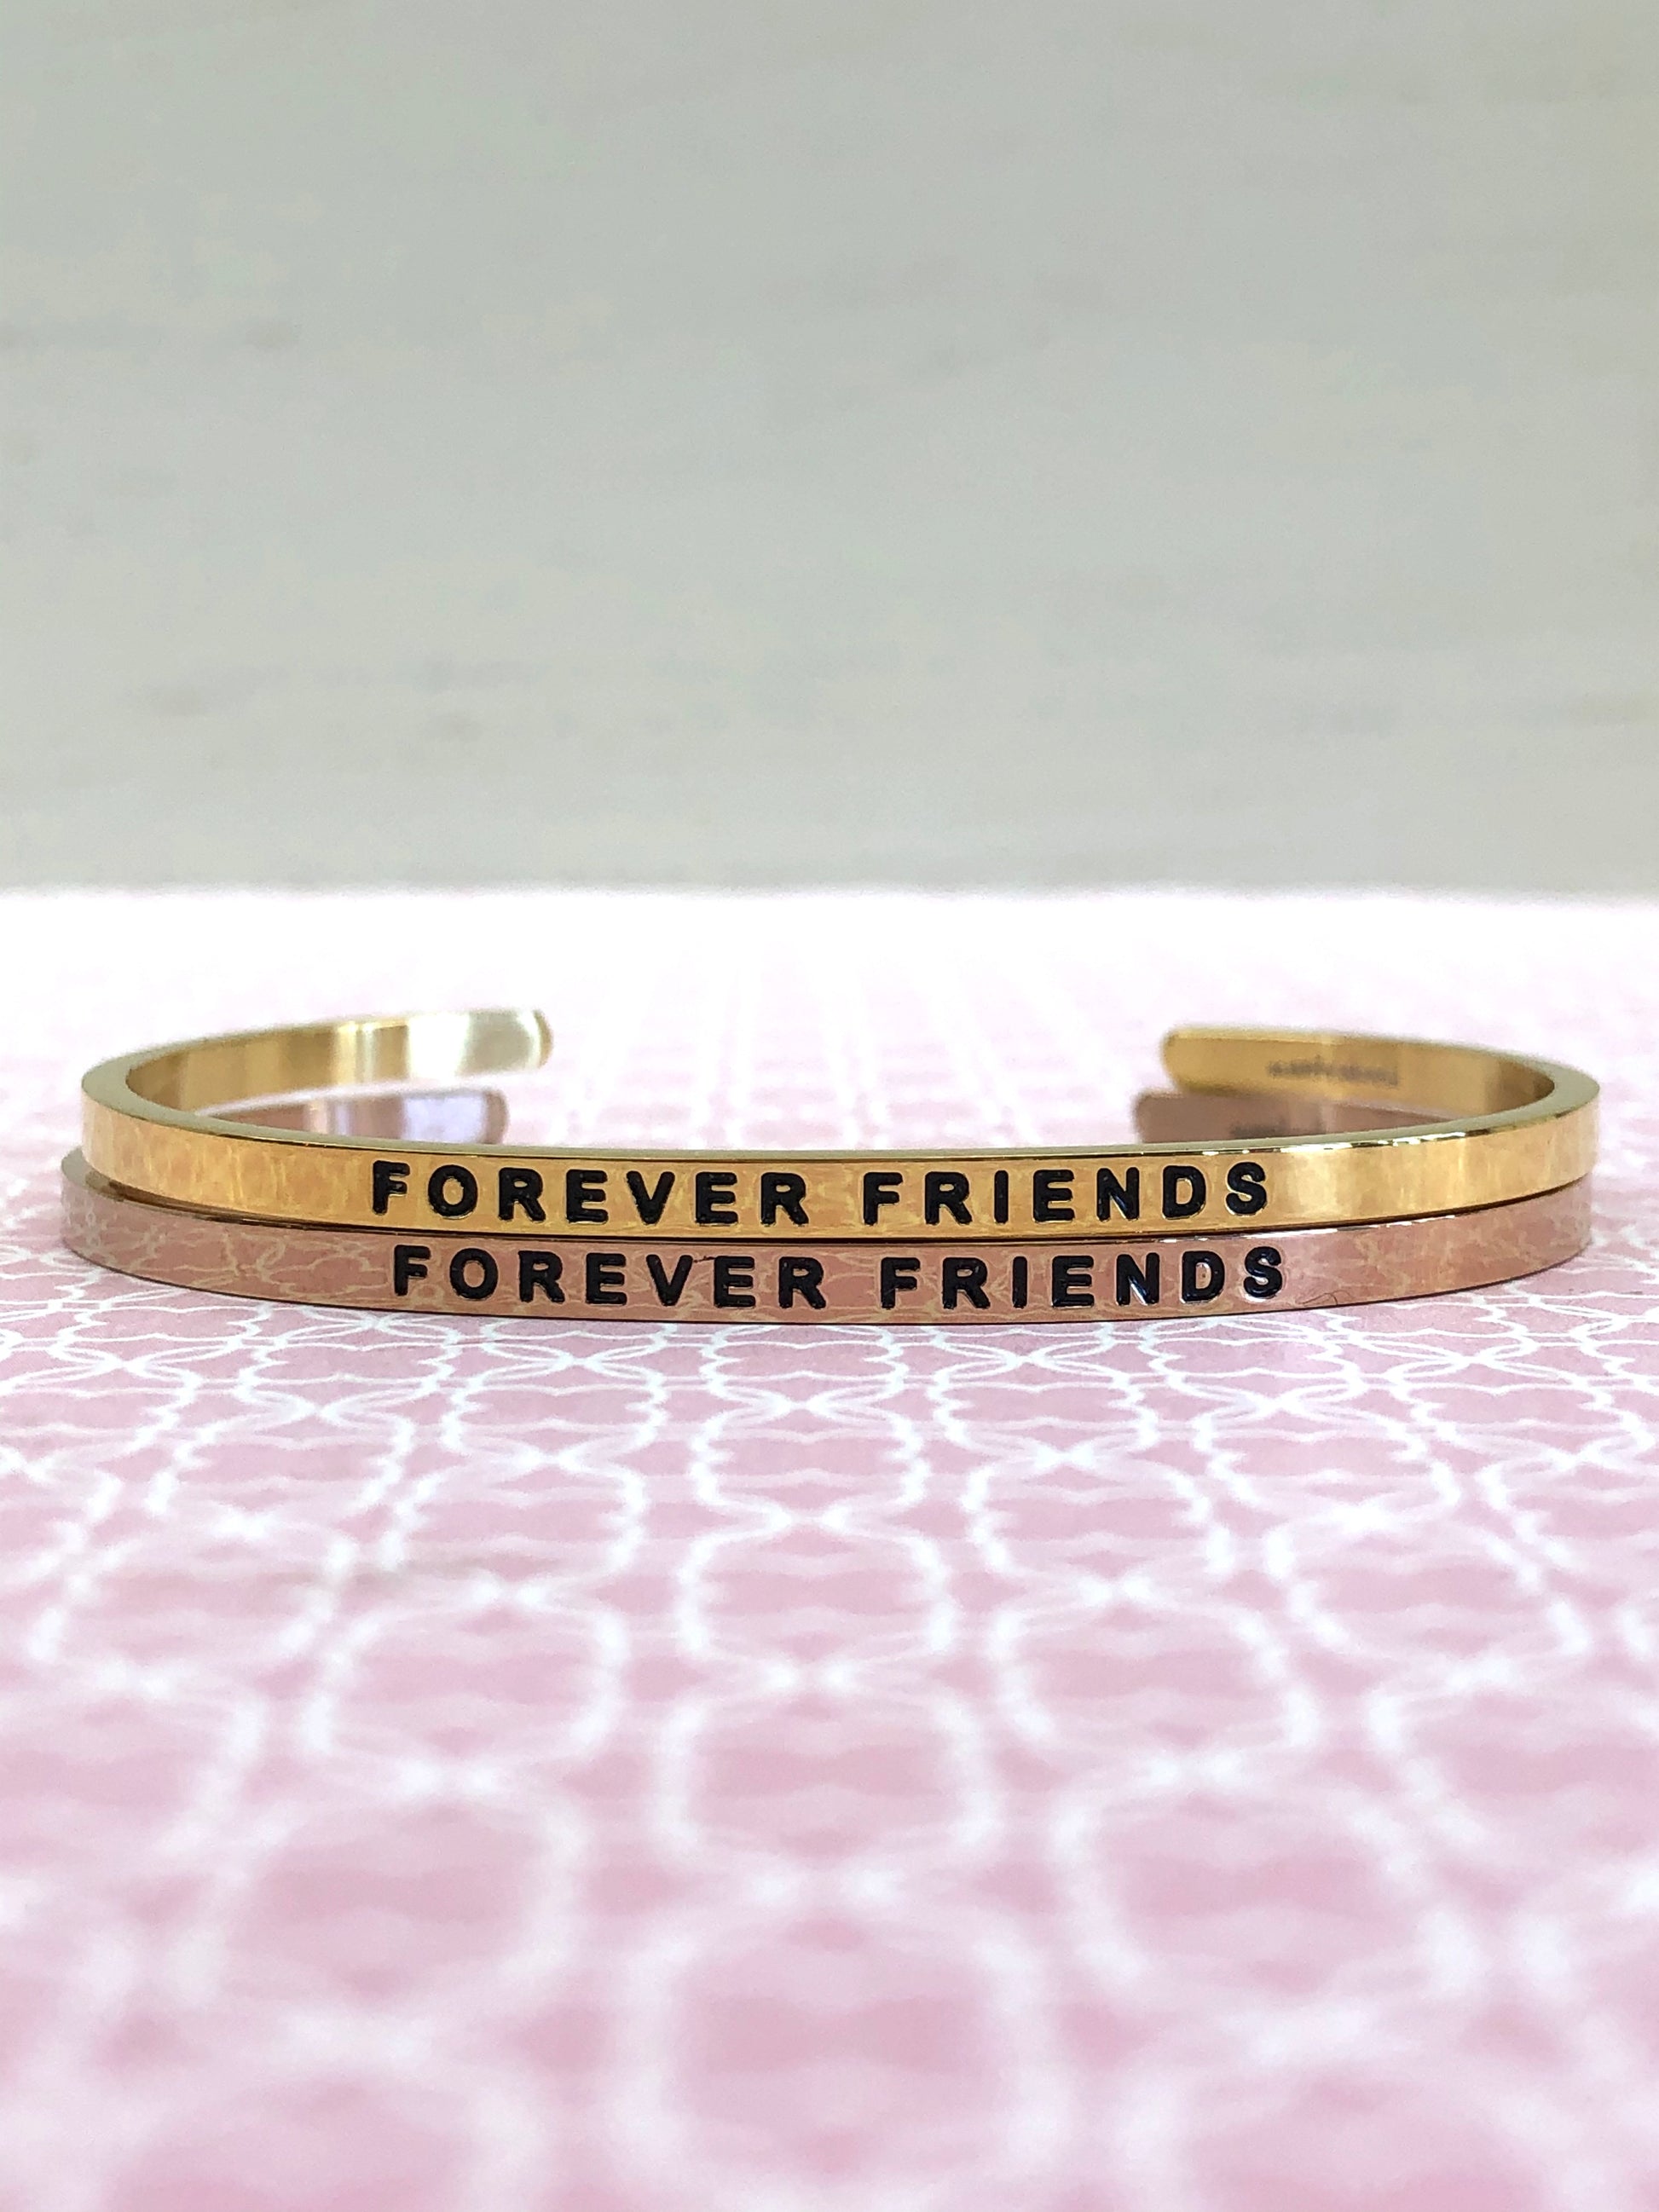 Forever Friends MantraBand - Jewelry - SierraLily